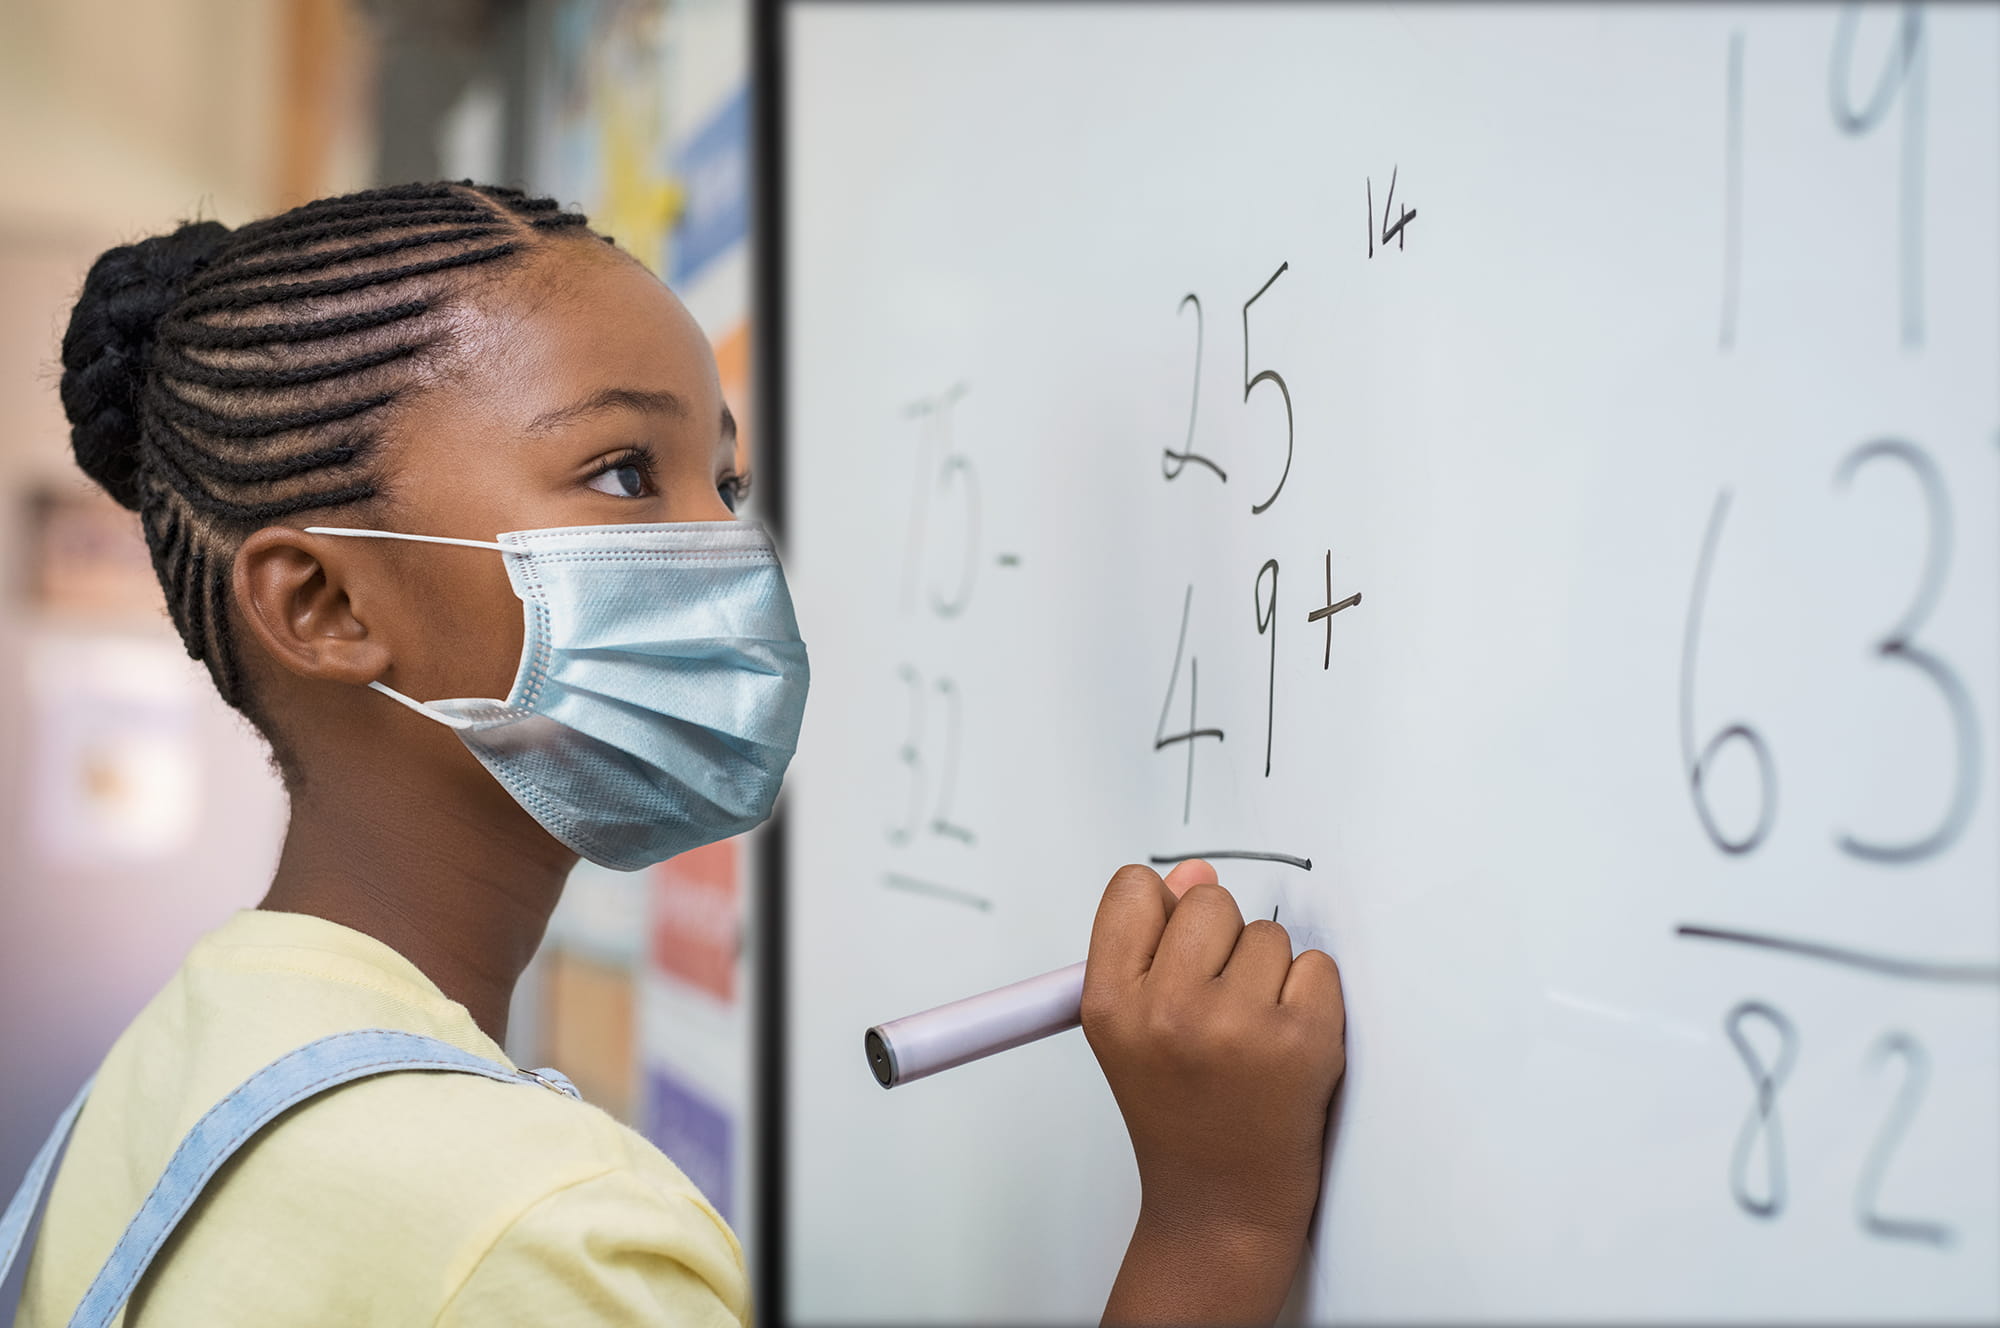 A student works on a math problem at a whiteboard while wearing a mask.